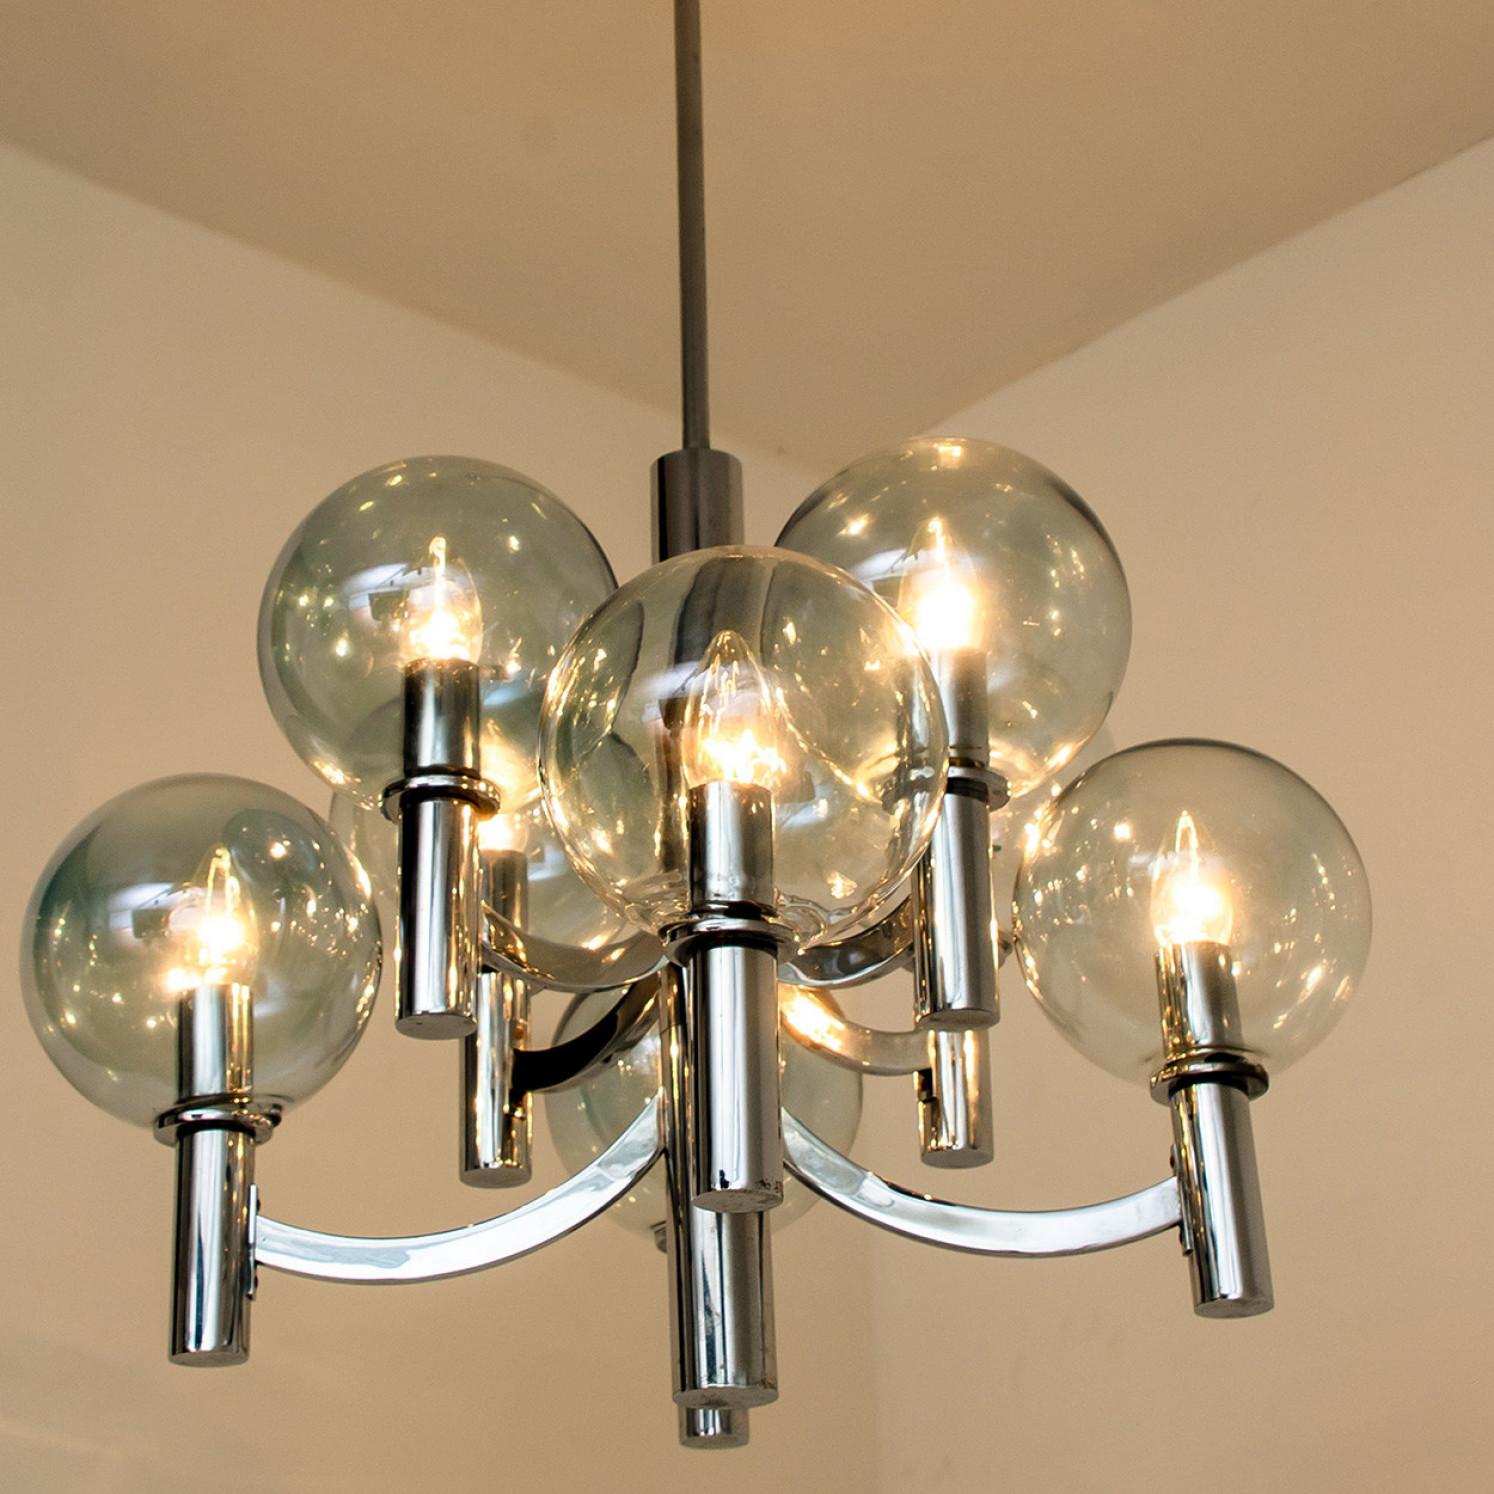 Art Glass Chrome and Light Blue Glass Chandelier in the style of Arne Jakobsson, 1970s For Sale